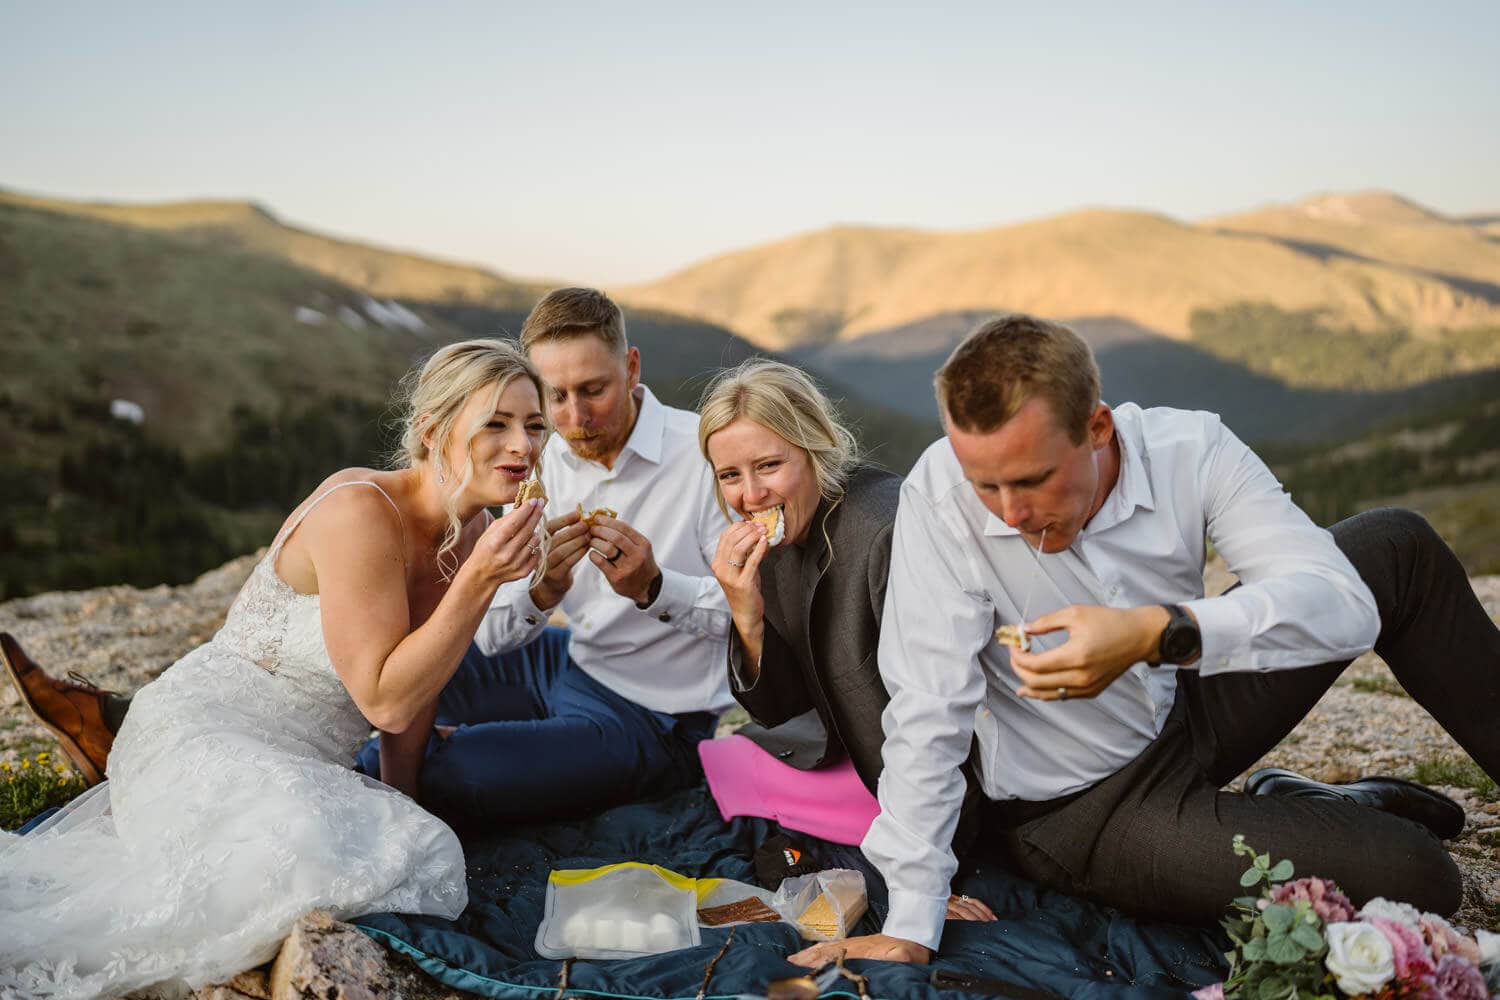 Picnic What You Should Pack for Your Elopement